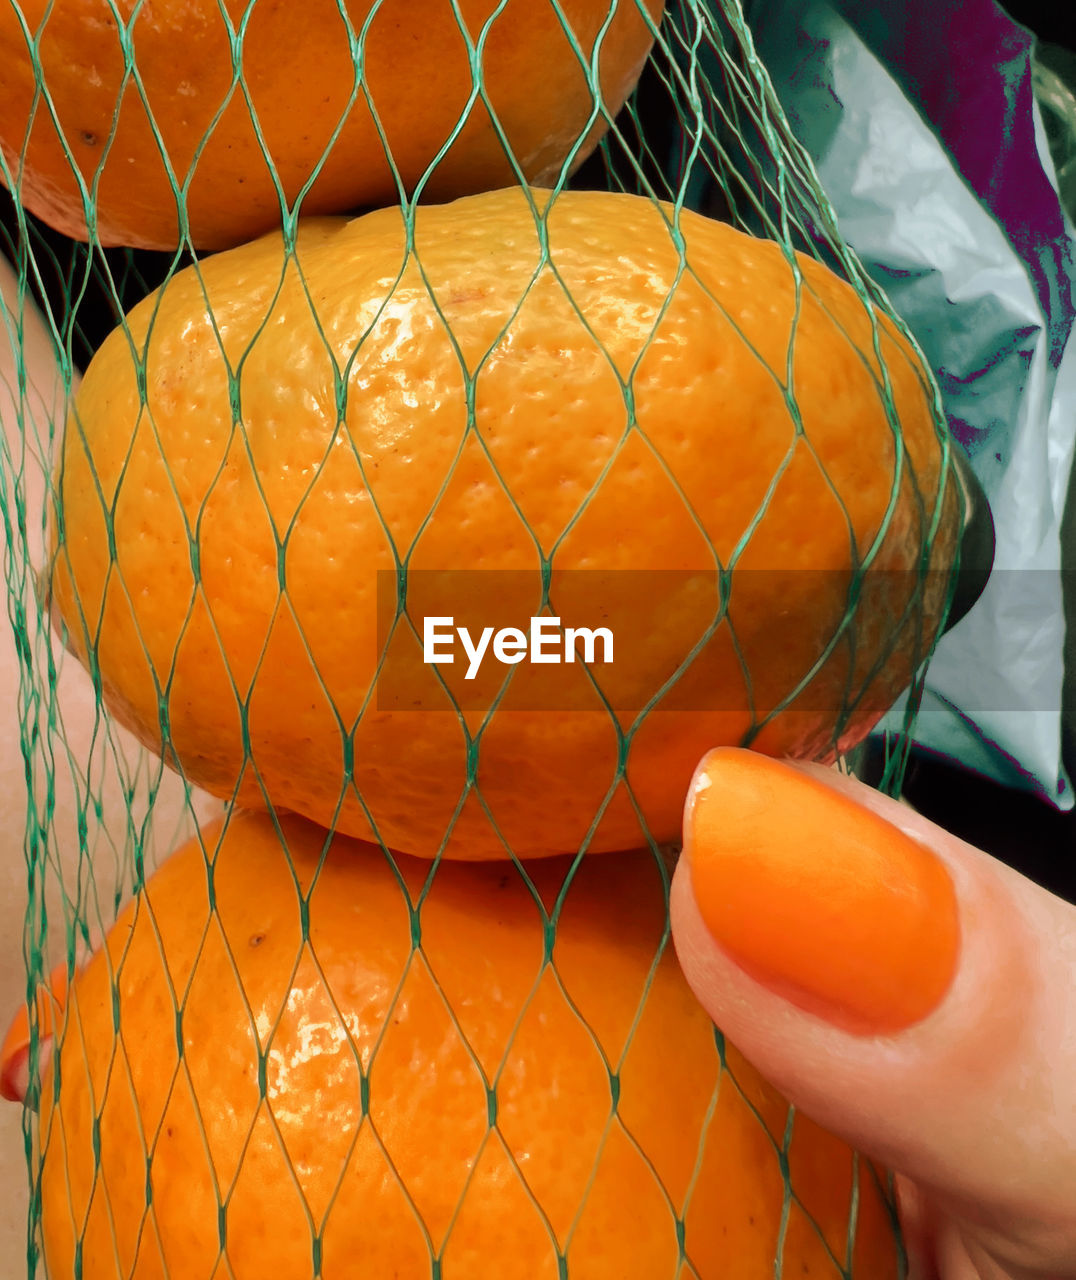 orange, yellow, produce, orange color, food, pumpkin, fruit, hand, chainlink fence, close-up, food and drink, fence, one person, clementine, healthy eating, plant, sports, outdoors, day, netting, holding, ball, wellbeing